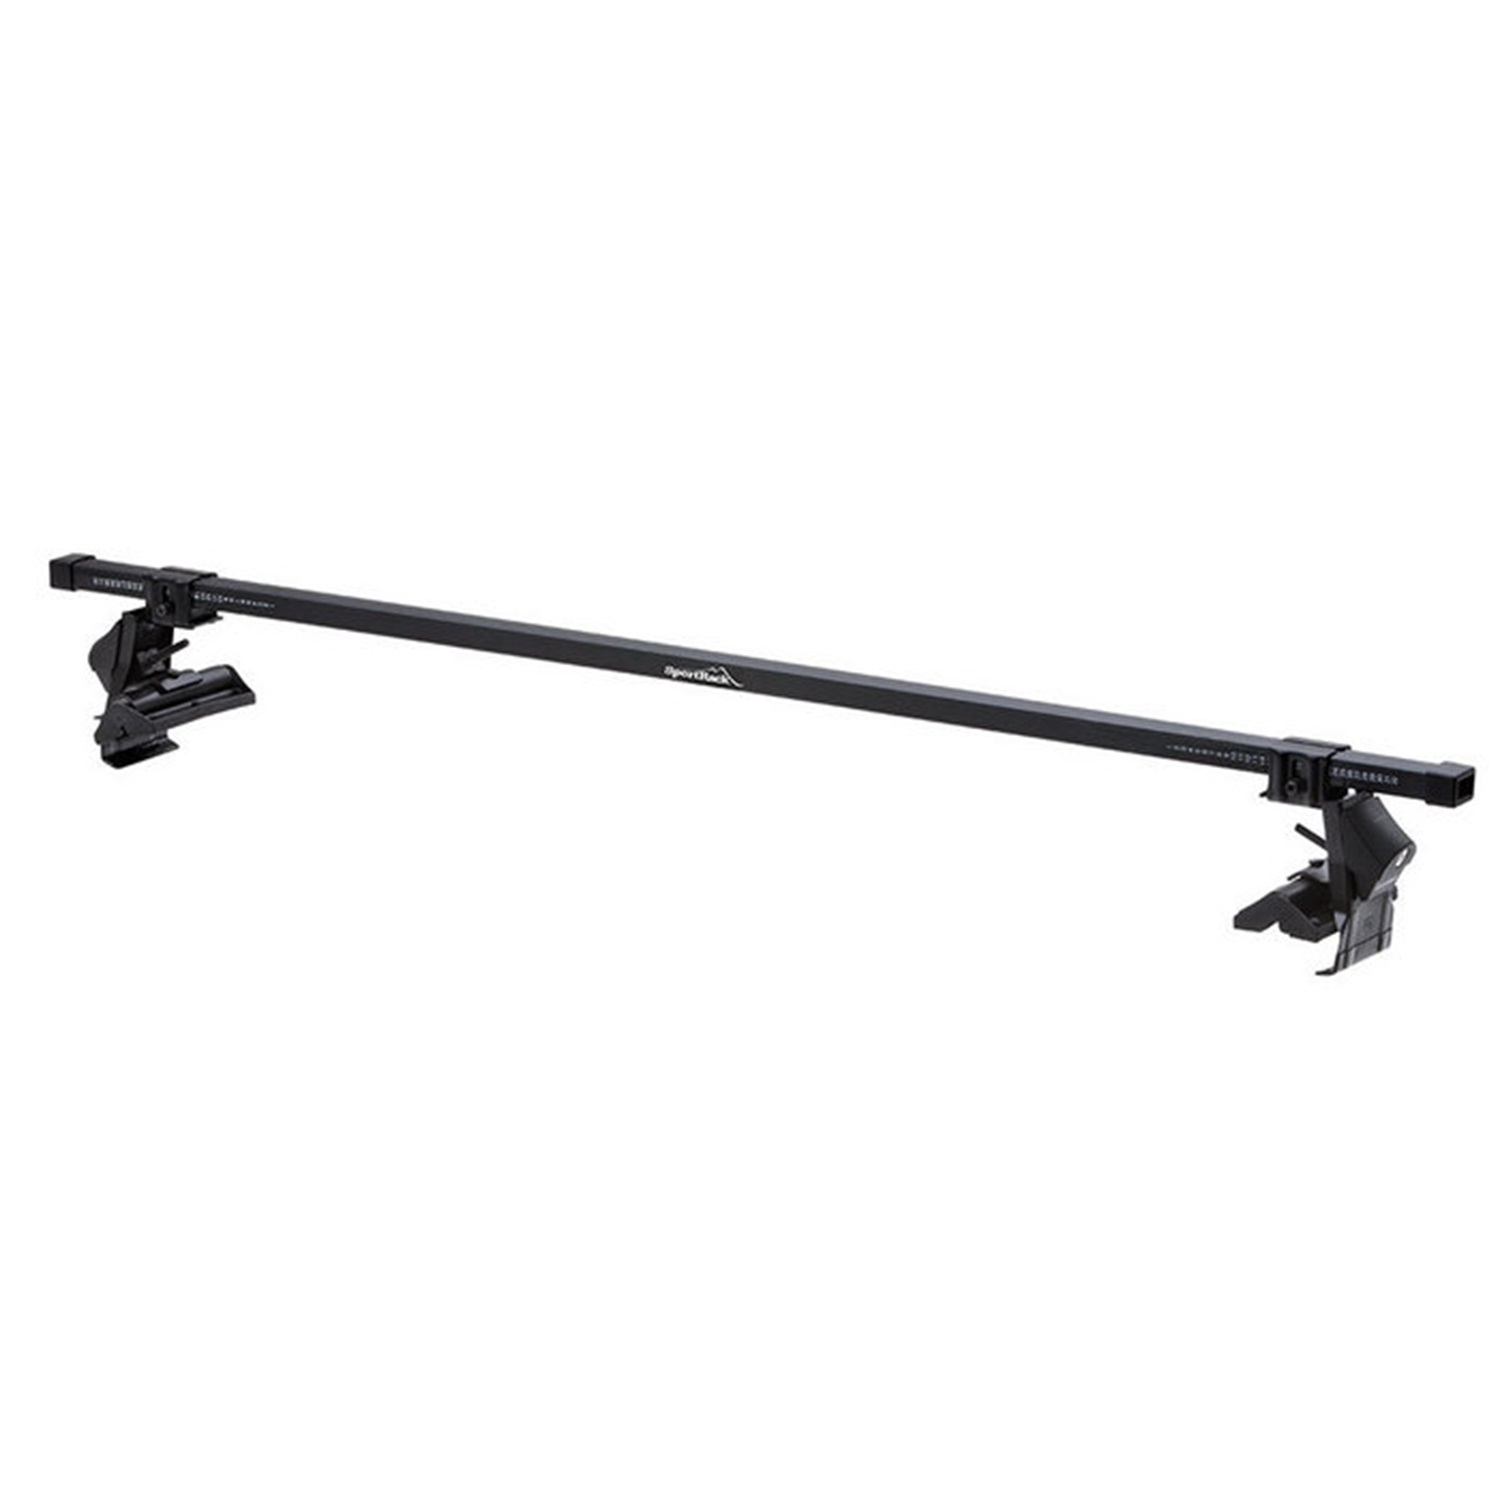 Thule Thule SR1004 SportRack Complete Roof Rack System